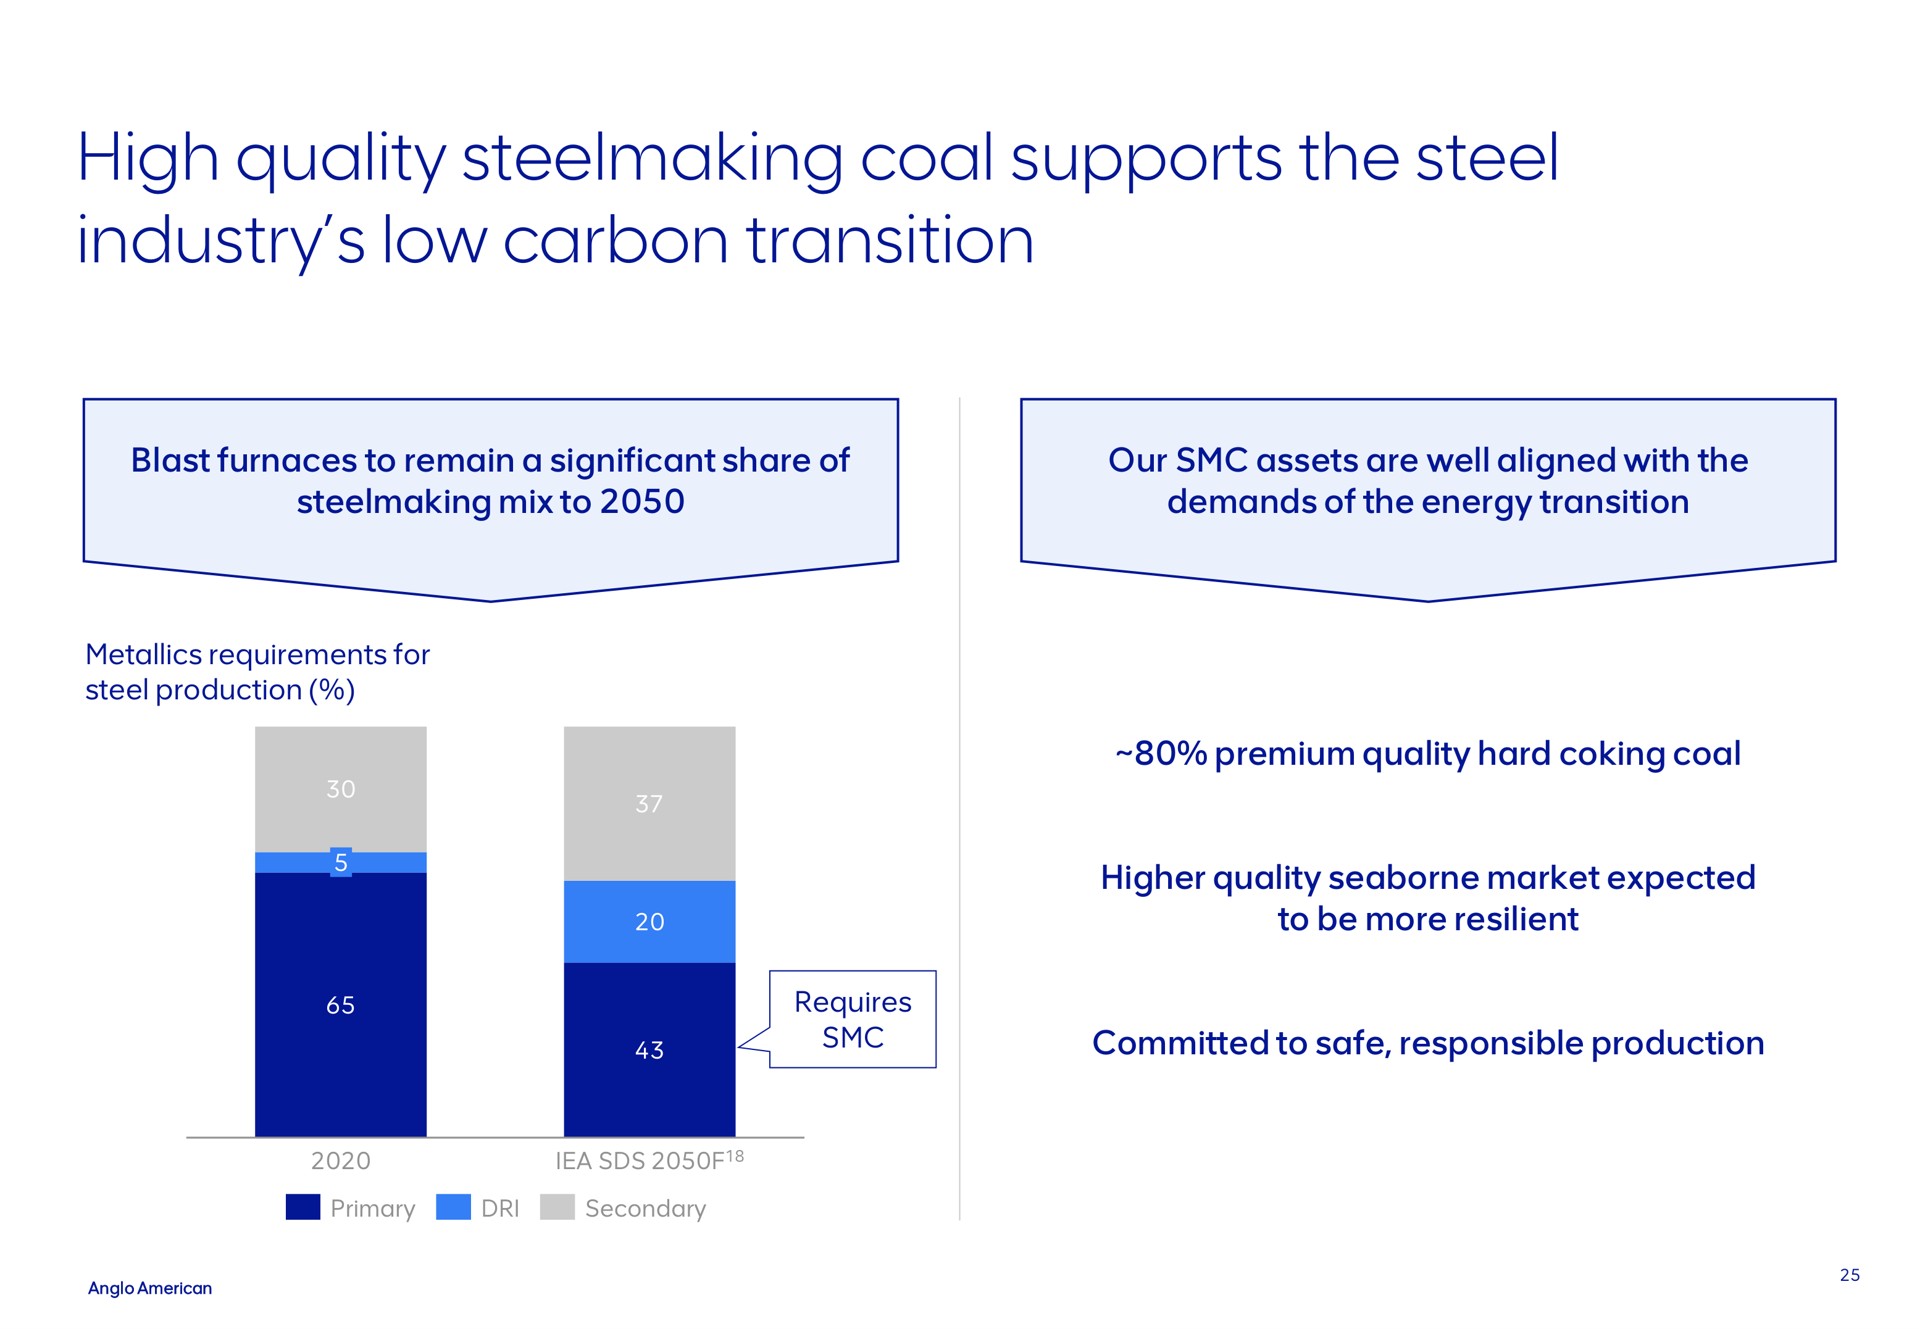 high quality steelmaking coal supports the steel industry low carbon transition | AngloAmerican